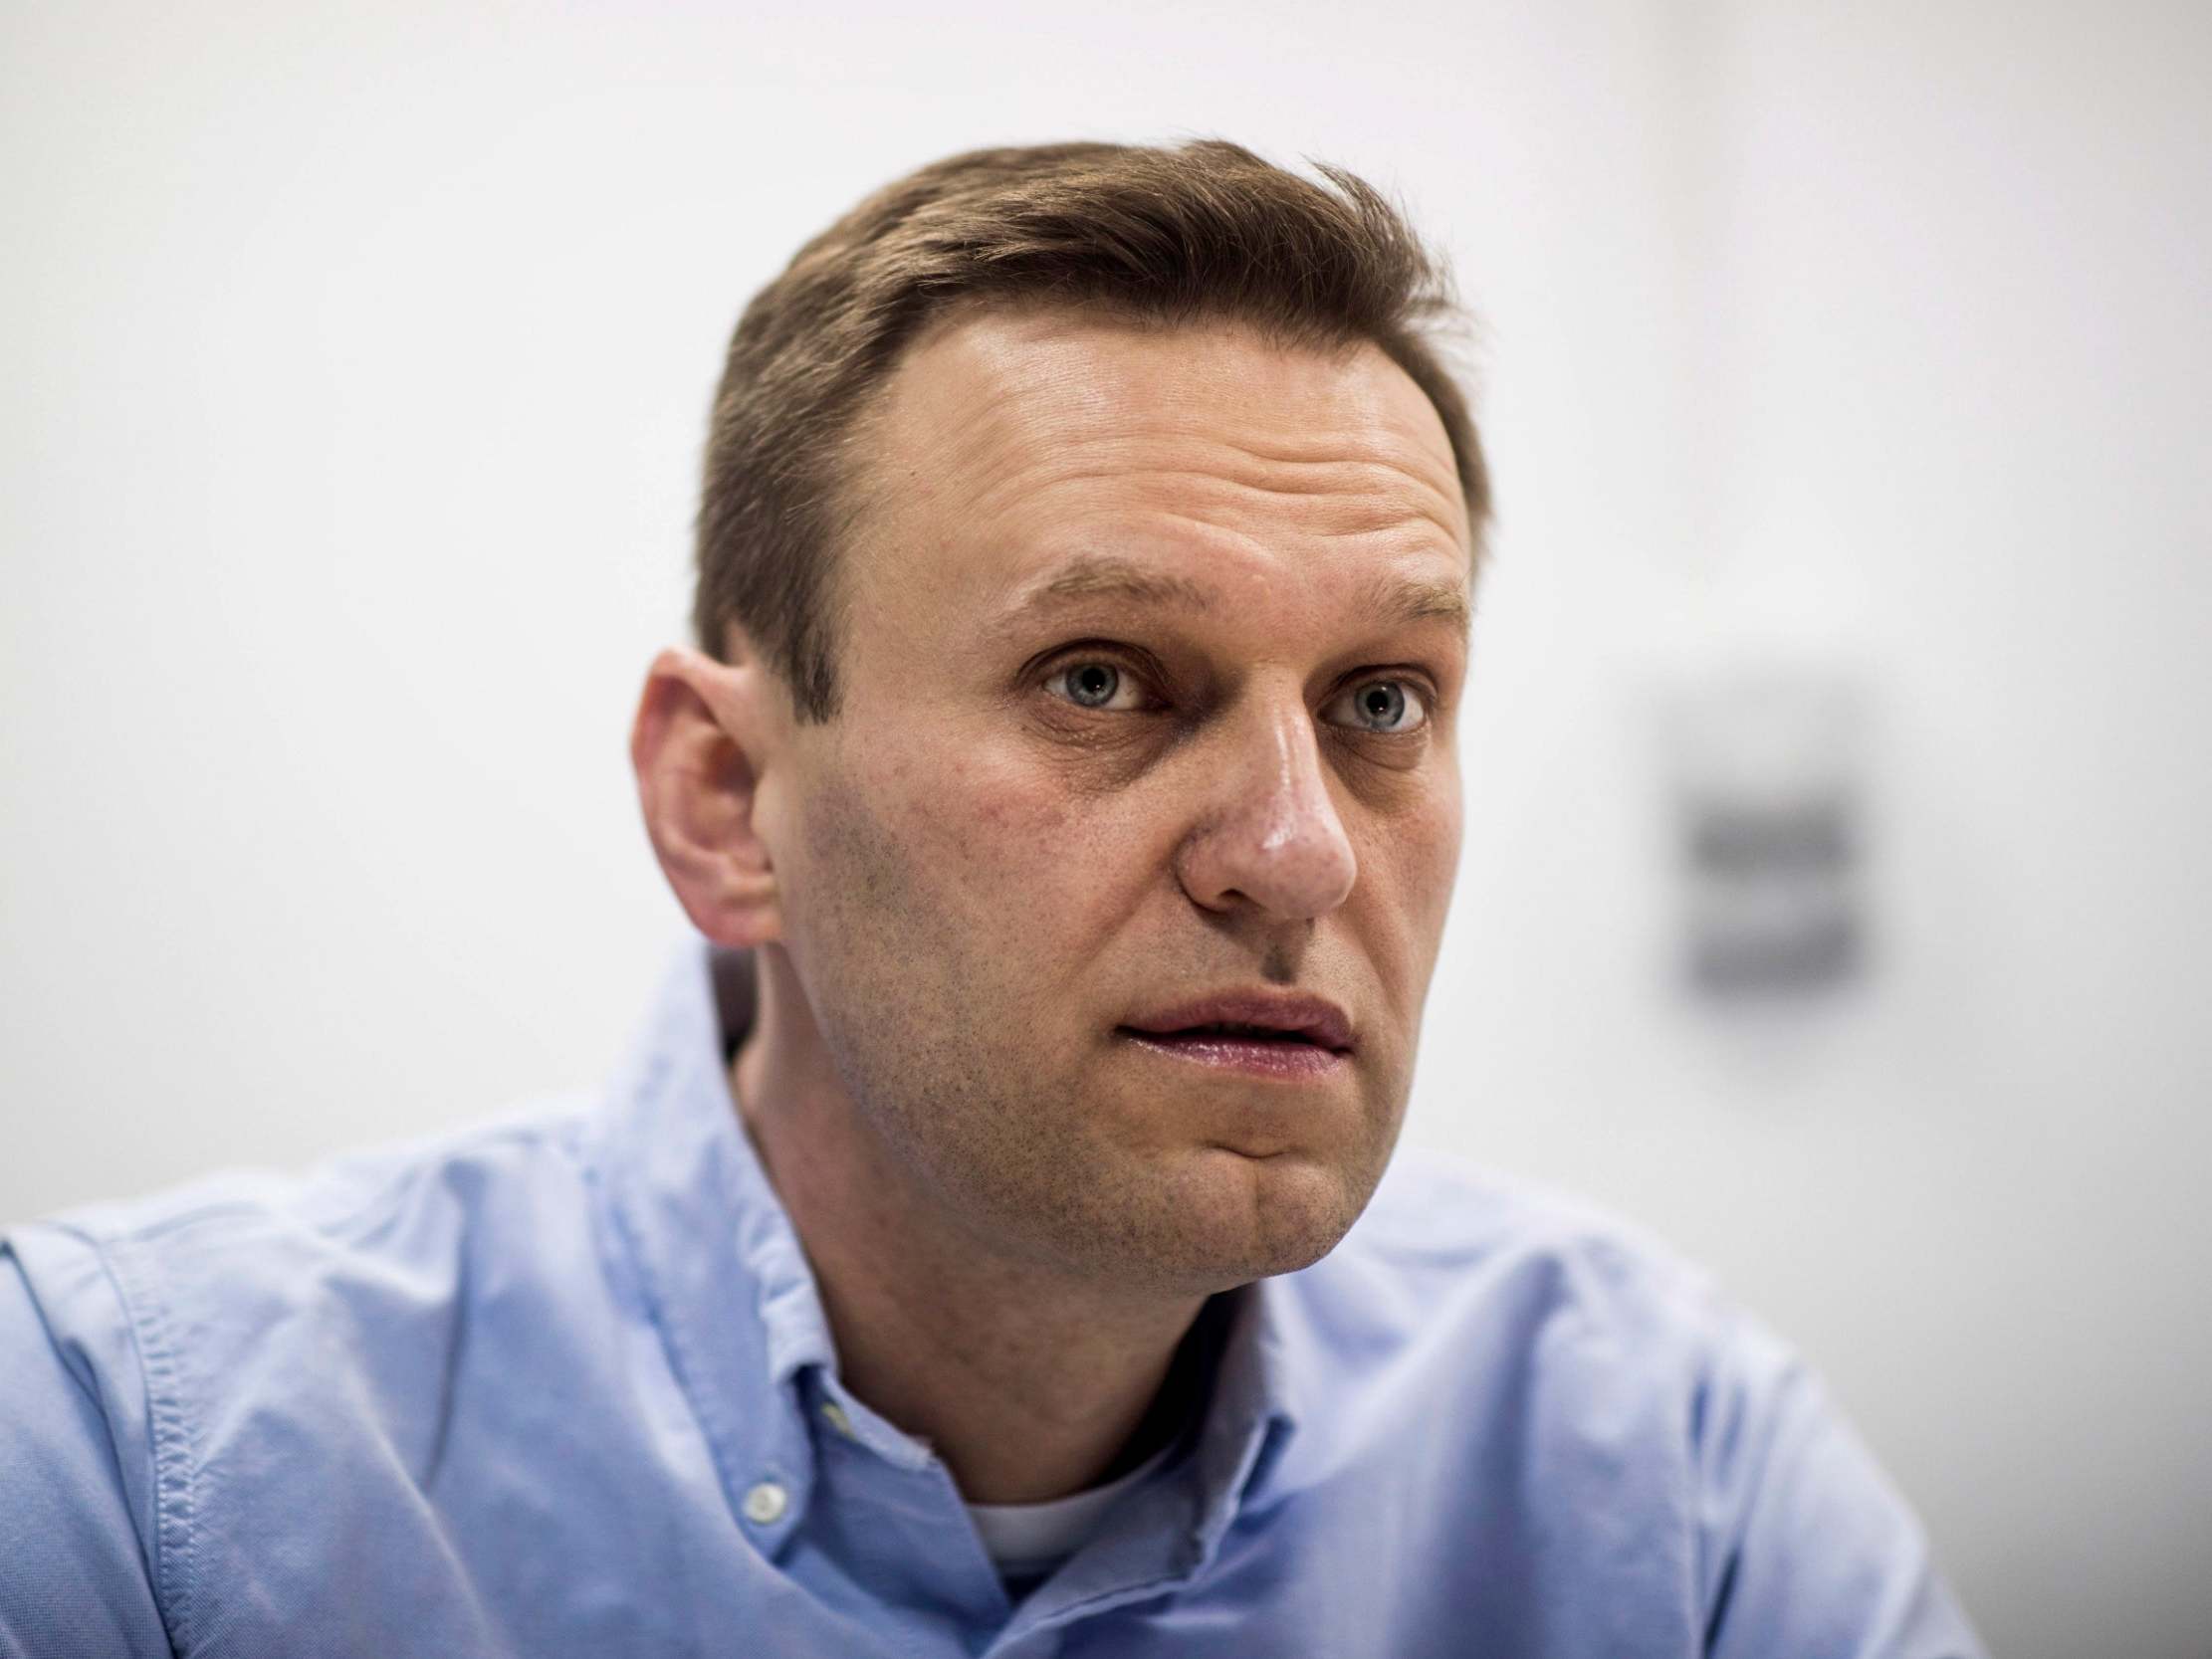 Alexei Navalny fell ill during a flight on 20 August